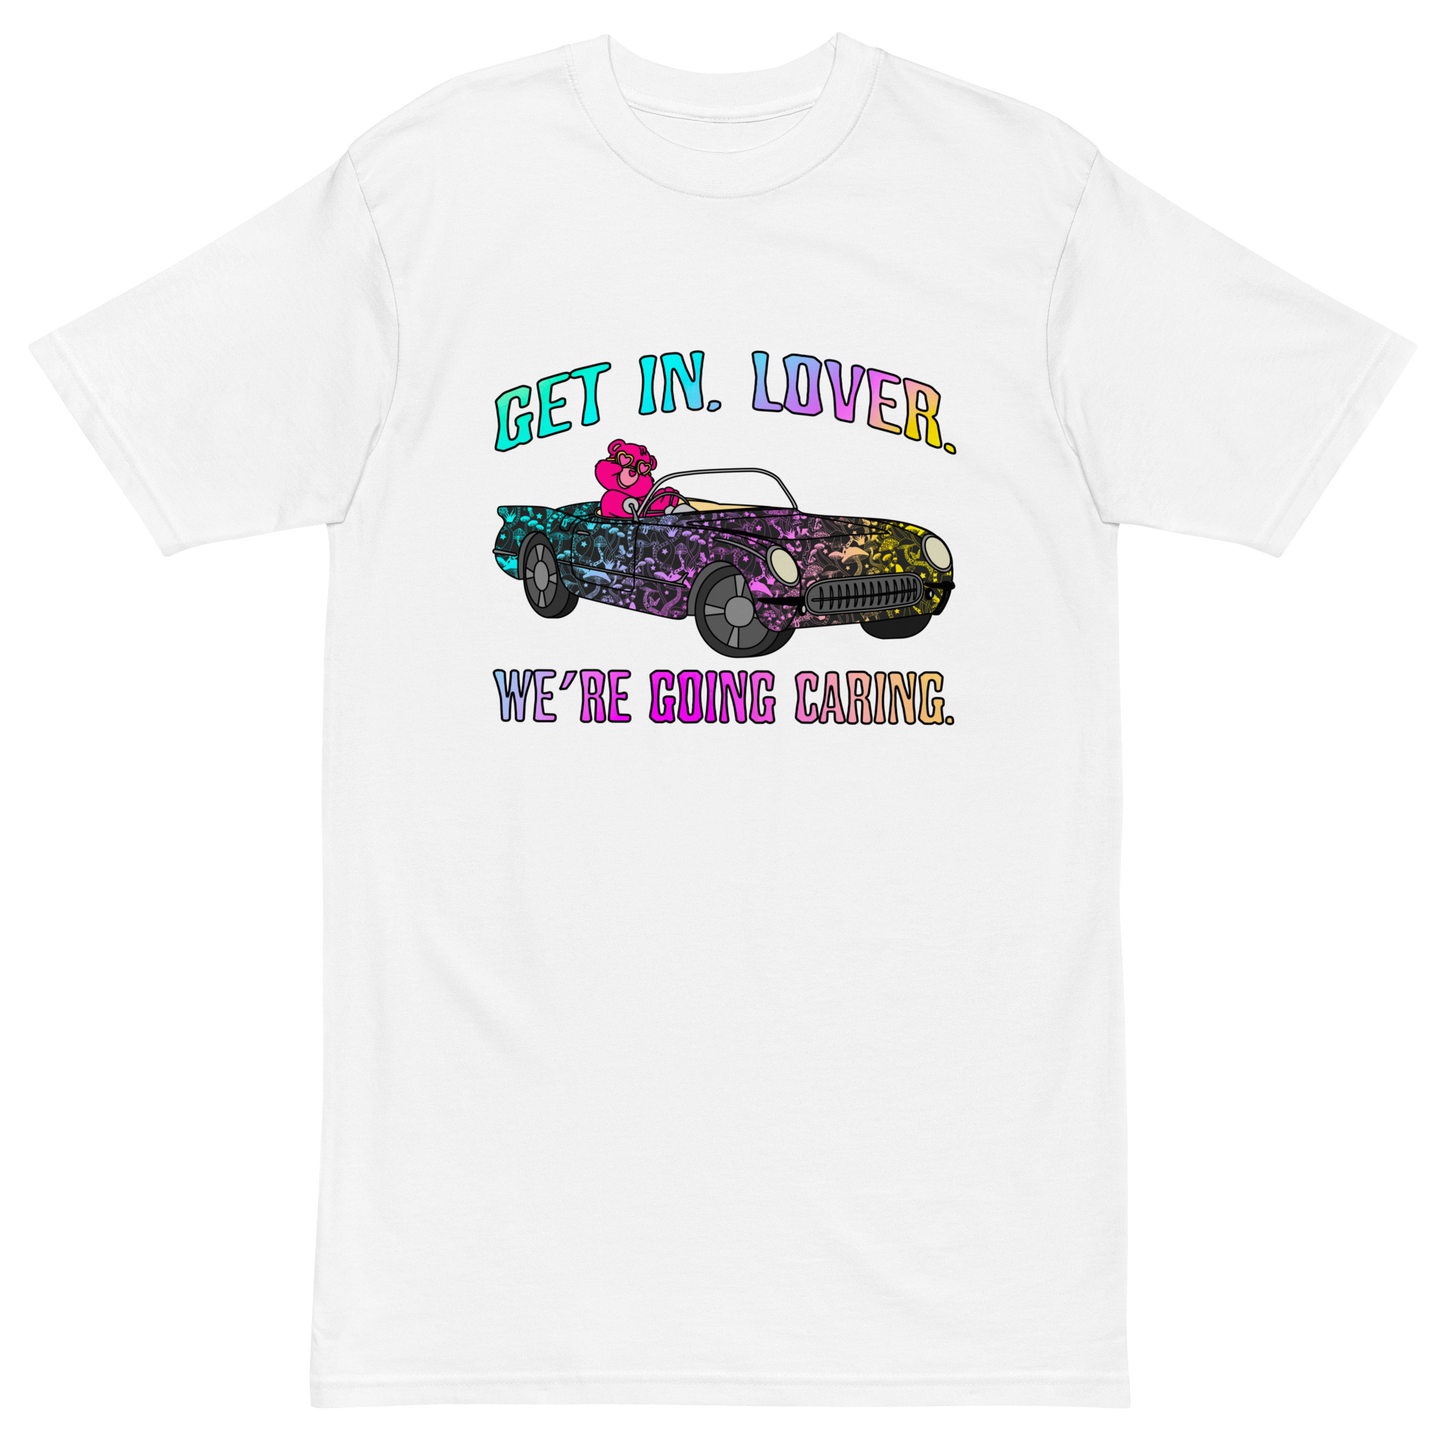 Get In, Lover. We're Going Caring Premium Graphic Tee